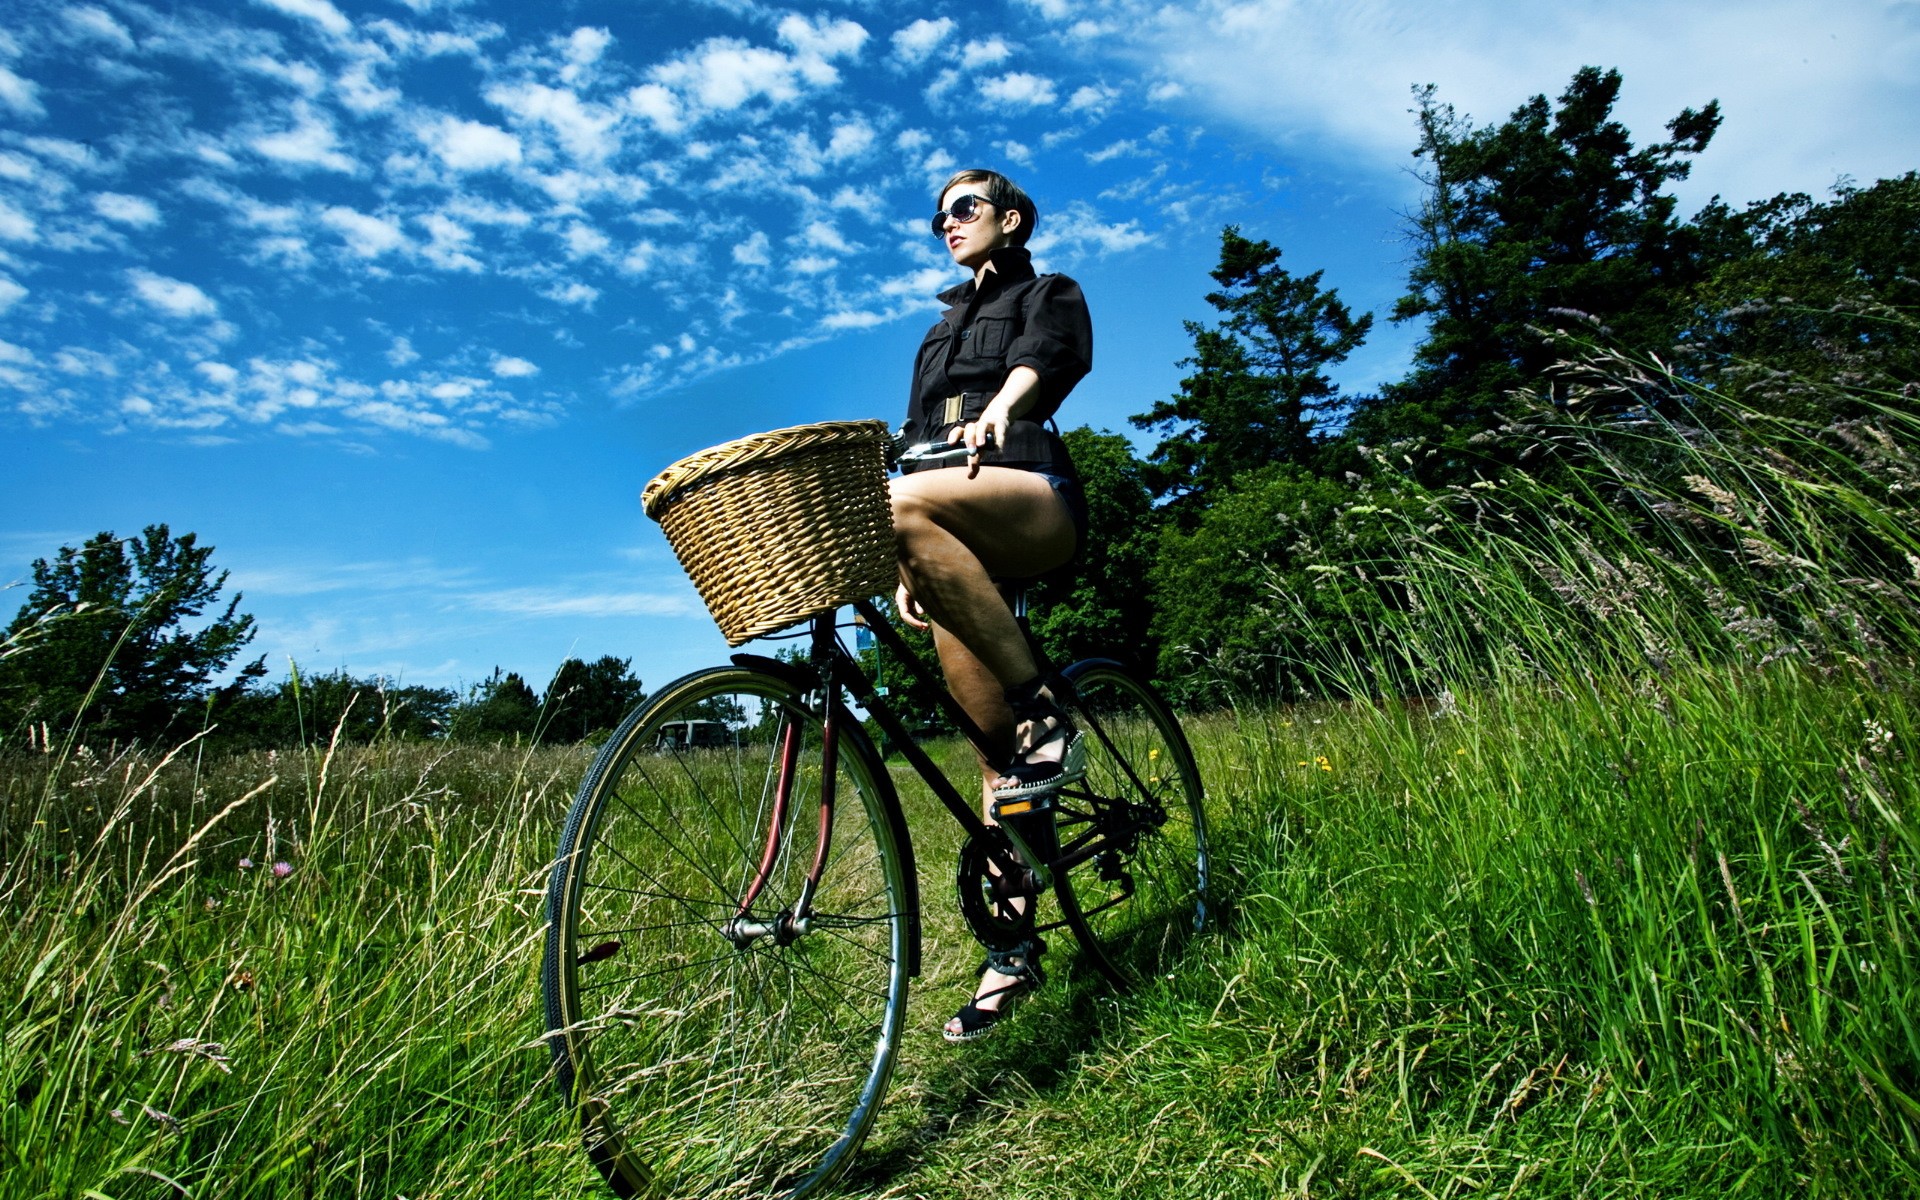 People 1920x1200 nature women with bicycles bicycle women outdoors baskets women with shades sunglasses outdoors vehicle women